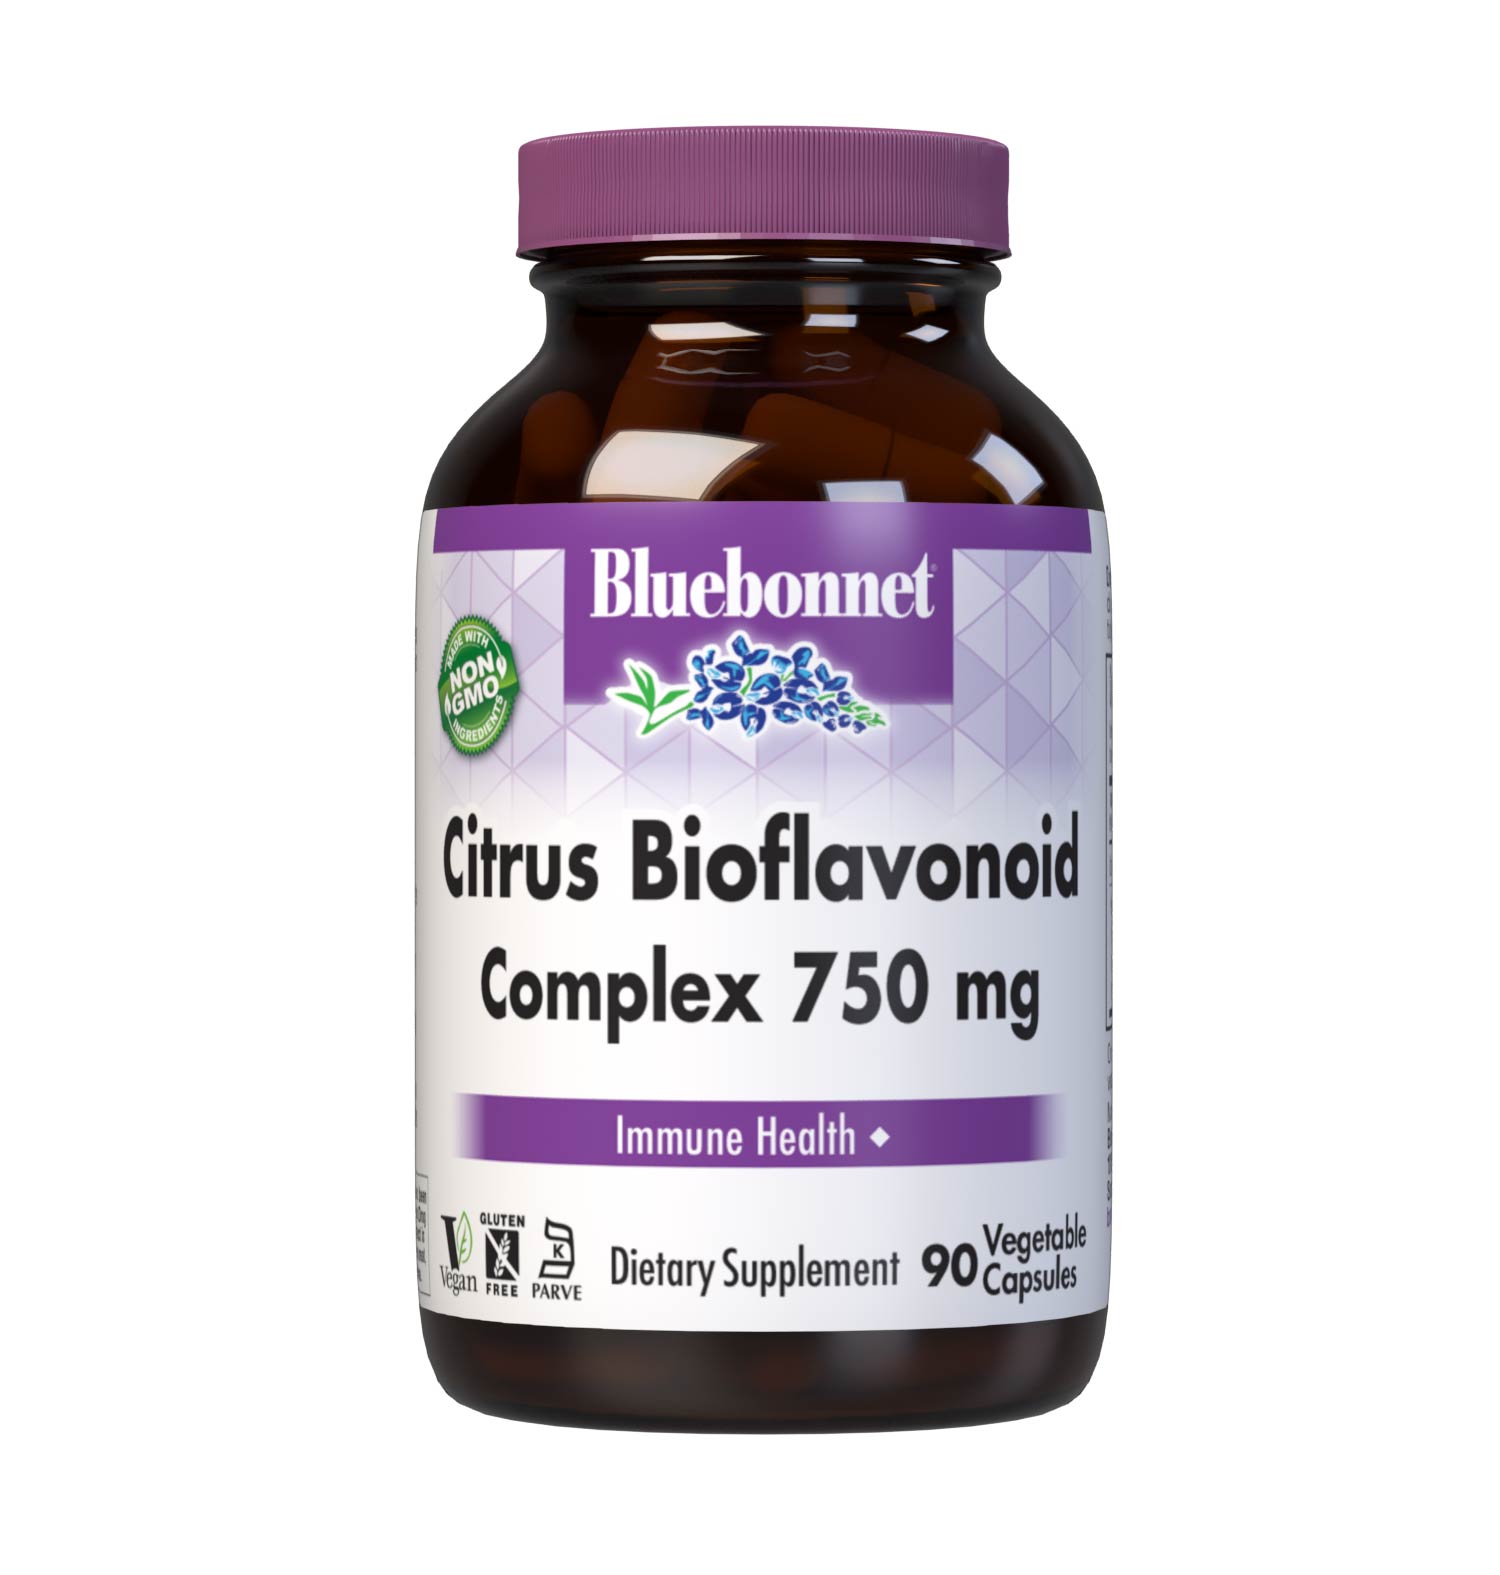 Bluebonnet’s Citrus Bioflavonoid Complex 750 mg 90 Vegetable Capsules are formulated with citrus bioflavonoids from oranges, lemons, tangerines, grapefruit and limes to help support immune function. #size_90 count